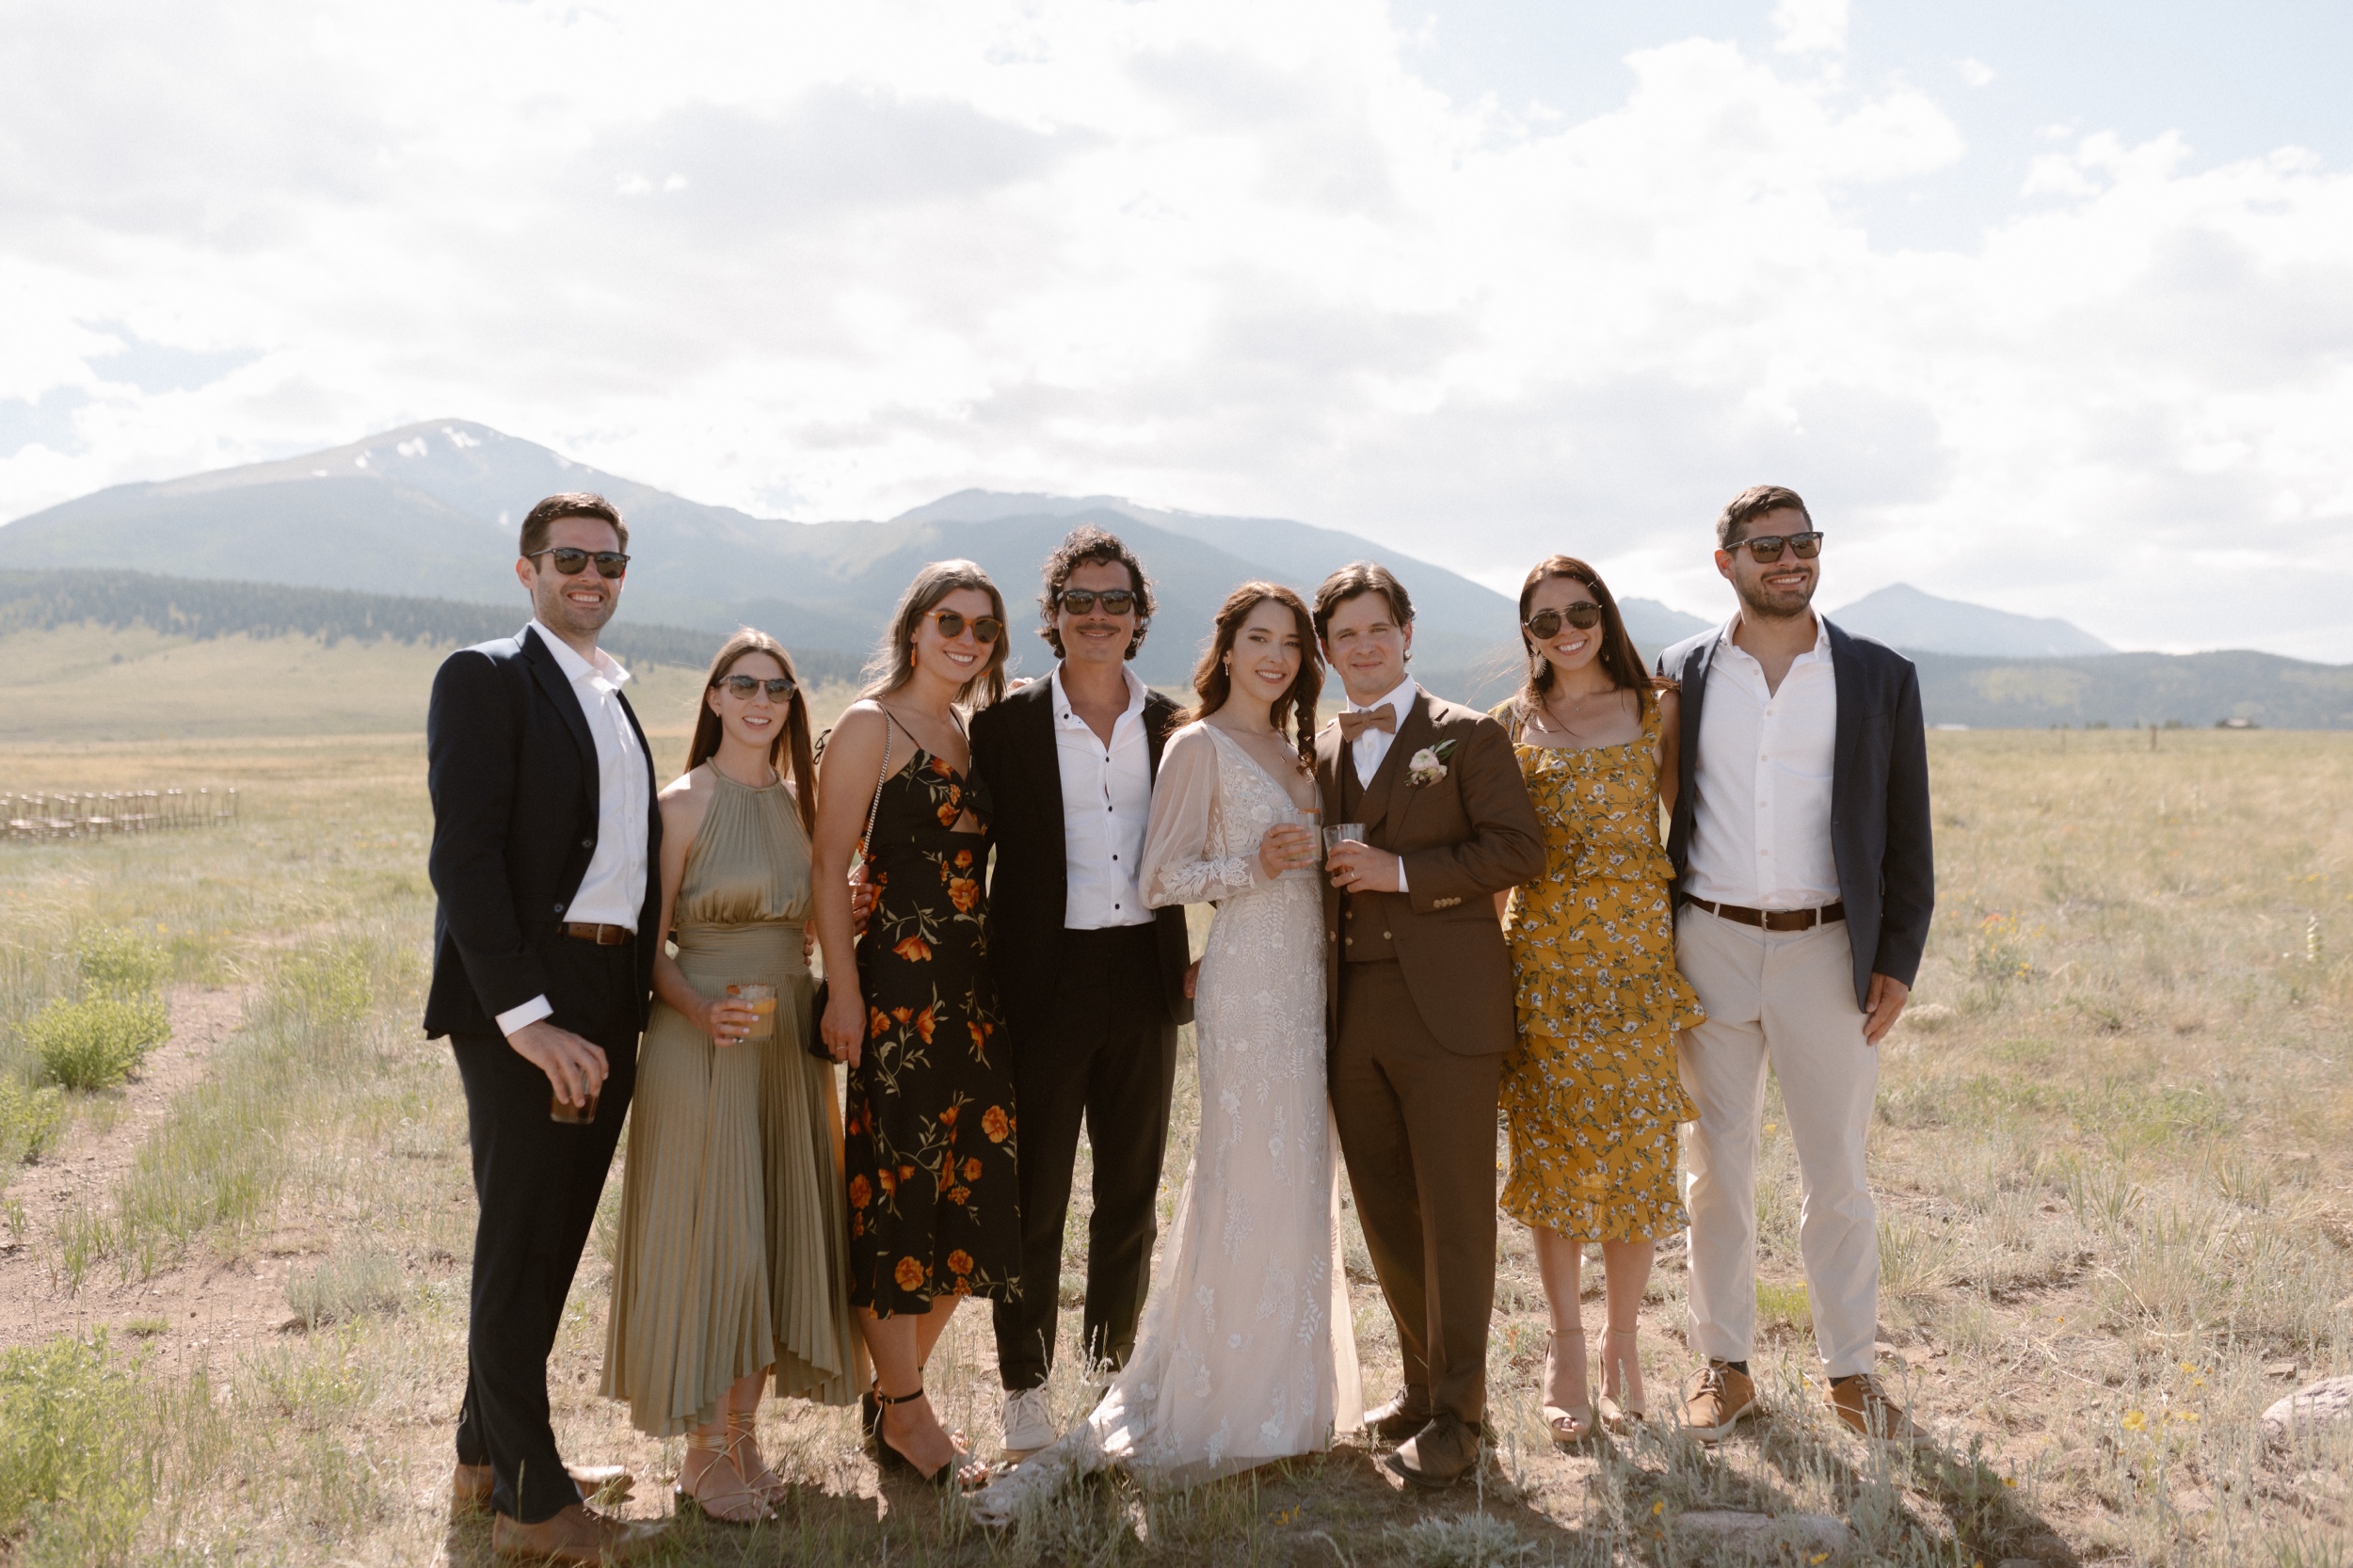 Six wedding guests pose with the bride and groom in a grassy field for a wedding portrait at Three Peaks Ranch. Photo by Colorado wedding photographer Ashley Joyce.